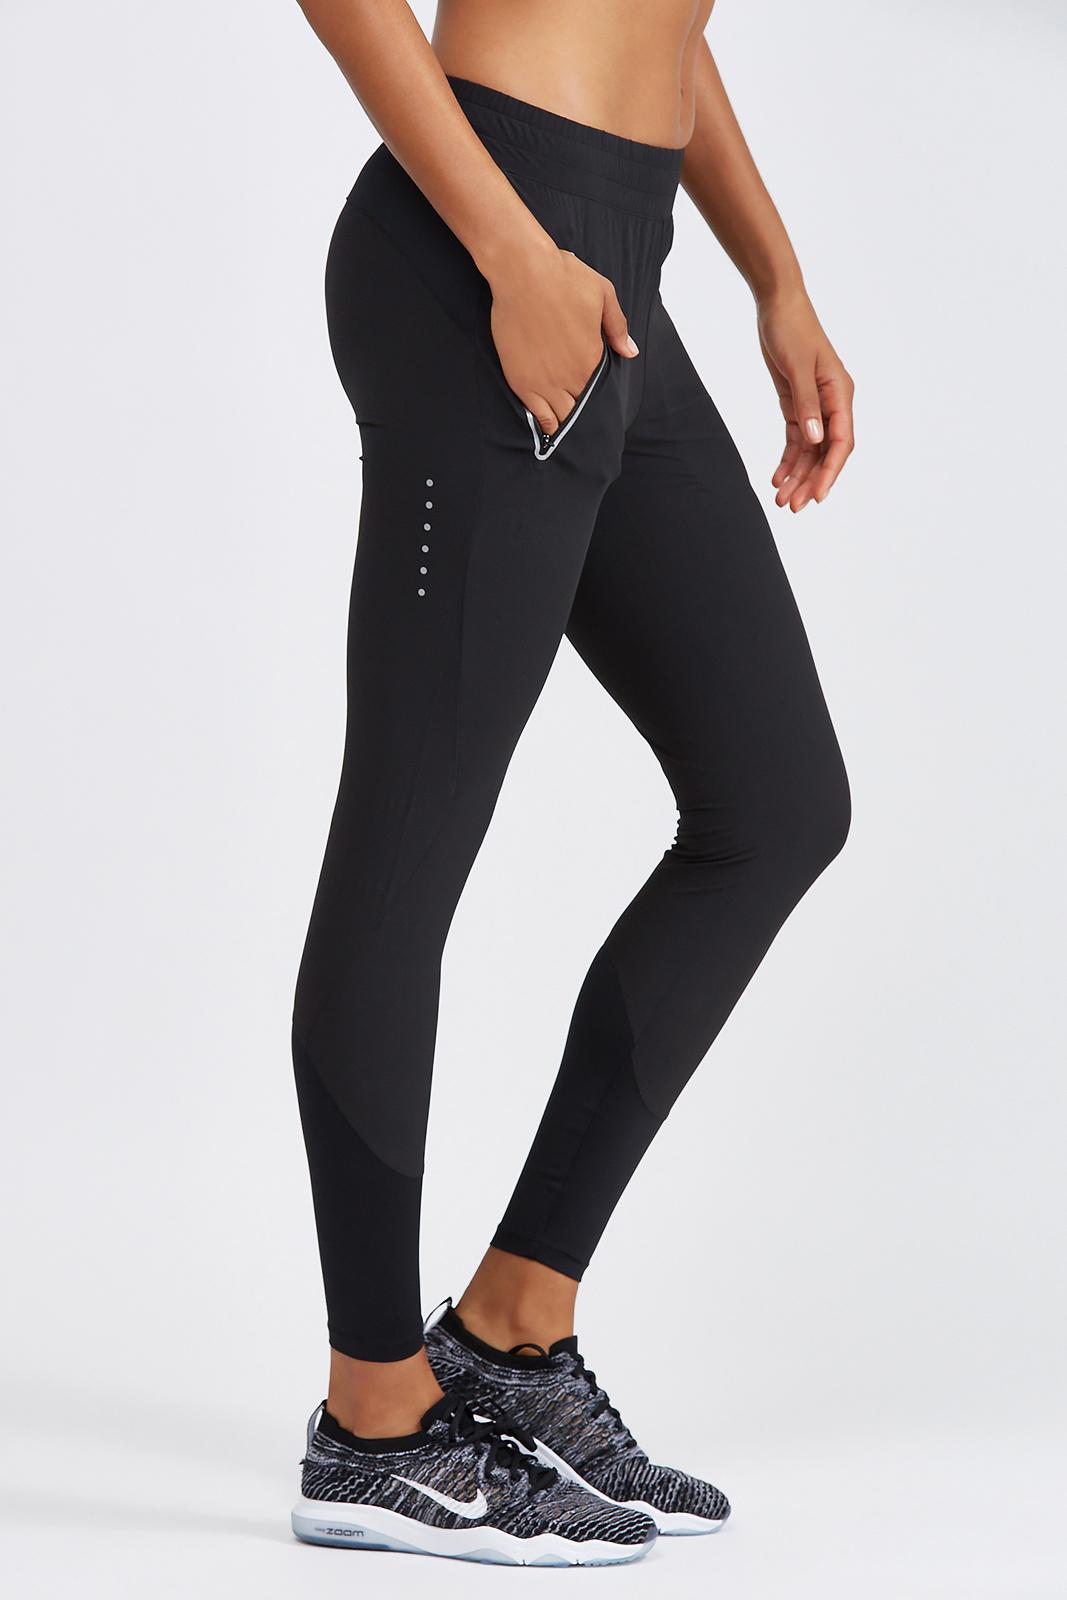 Nike Synthetic Flex Swift Running Pant in Black - Lyst